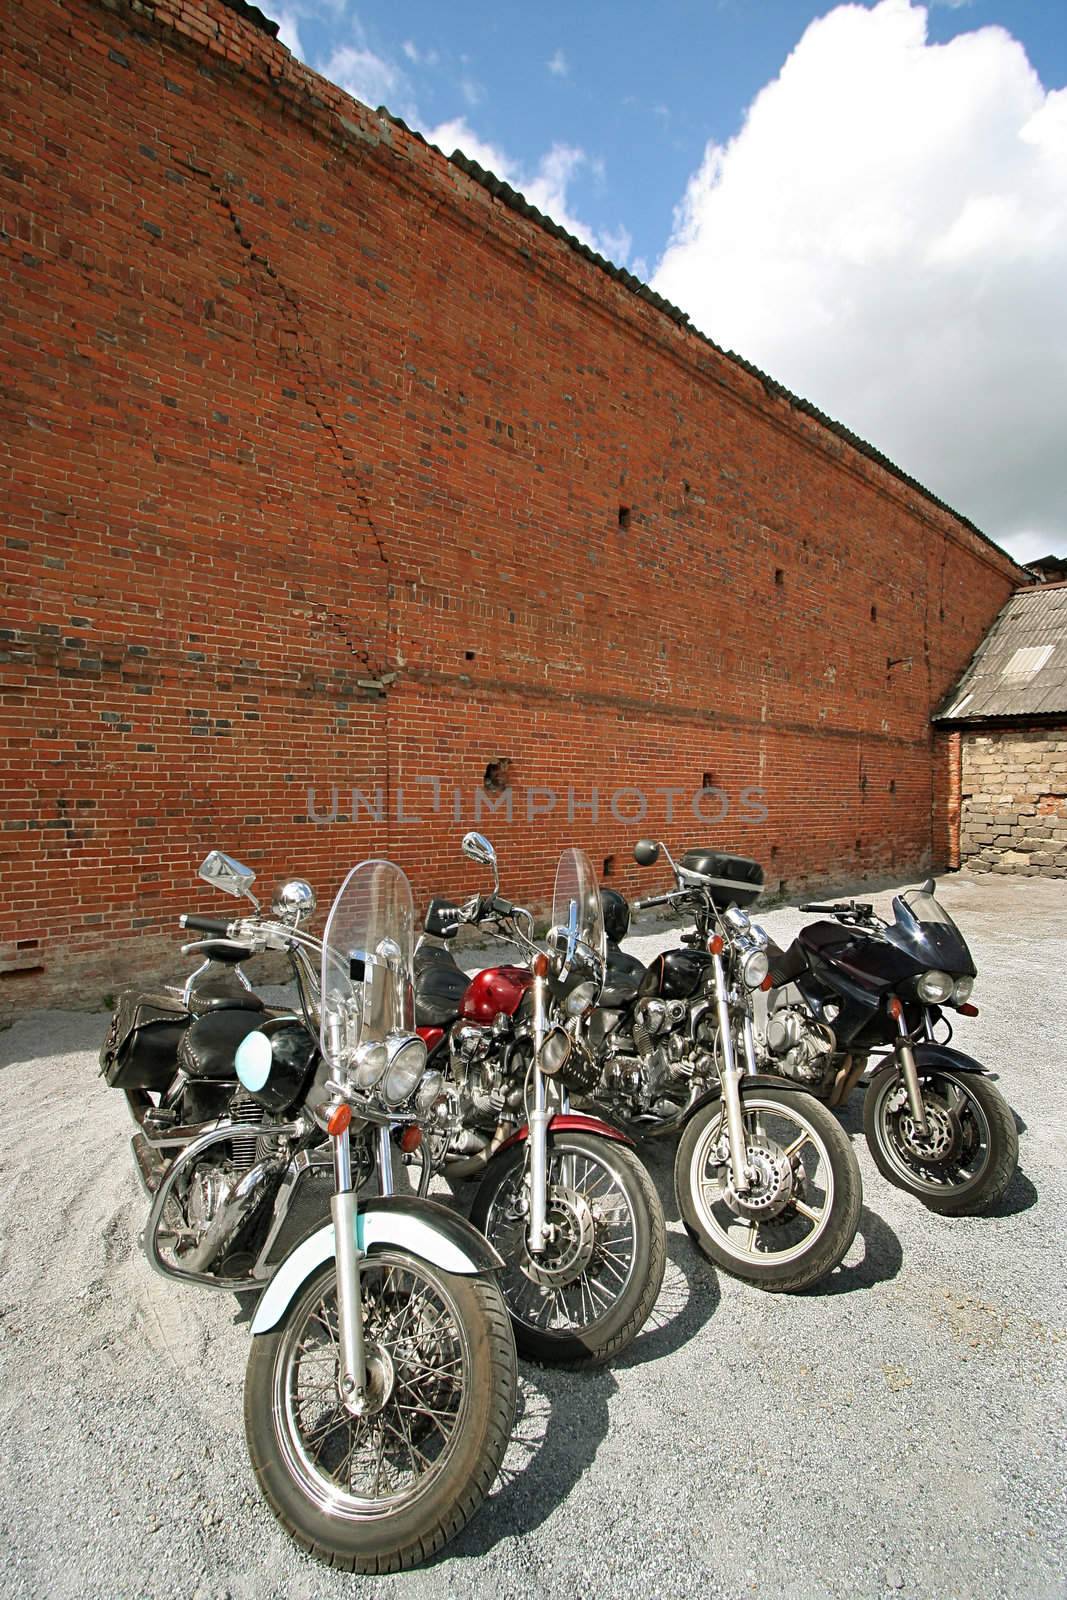 Motorcycles at a brick wall on a background of the sky